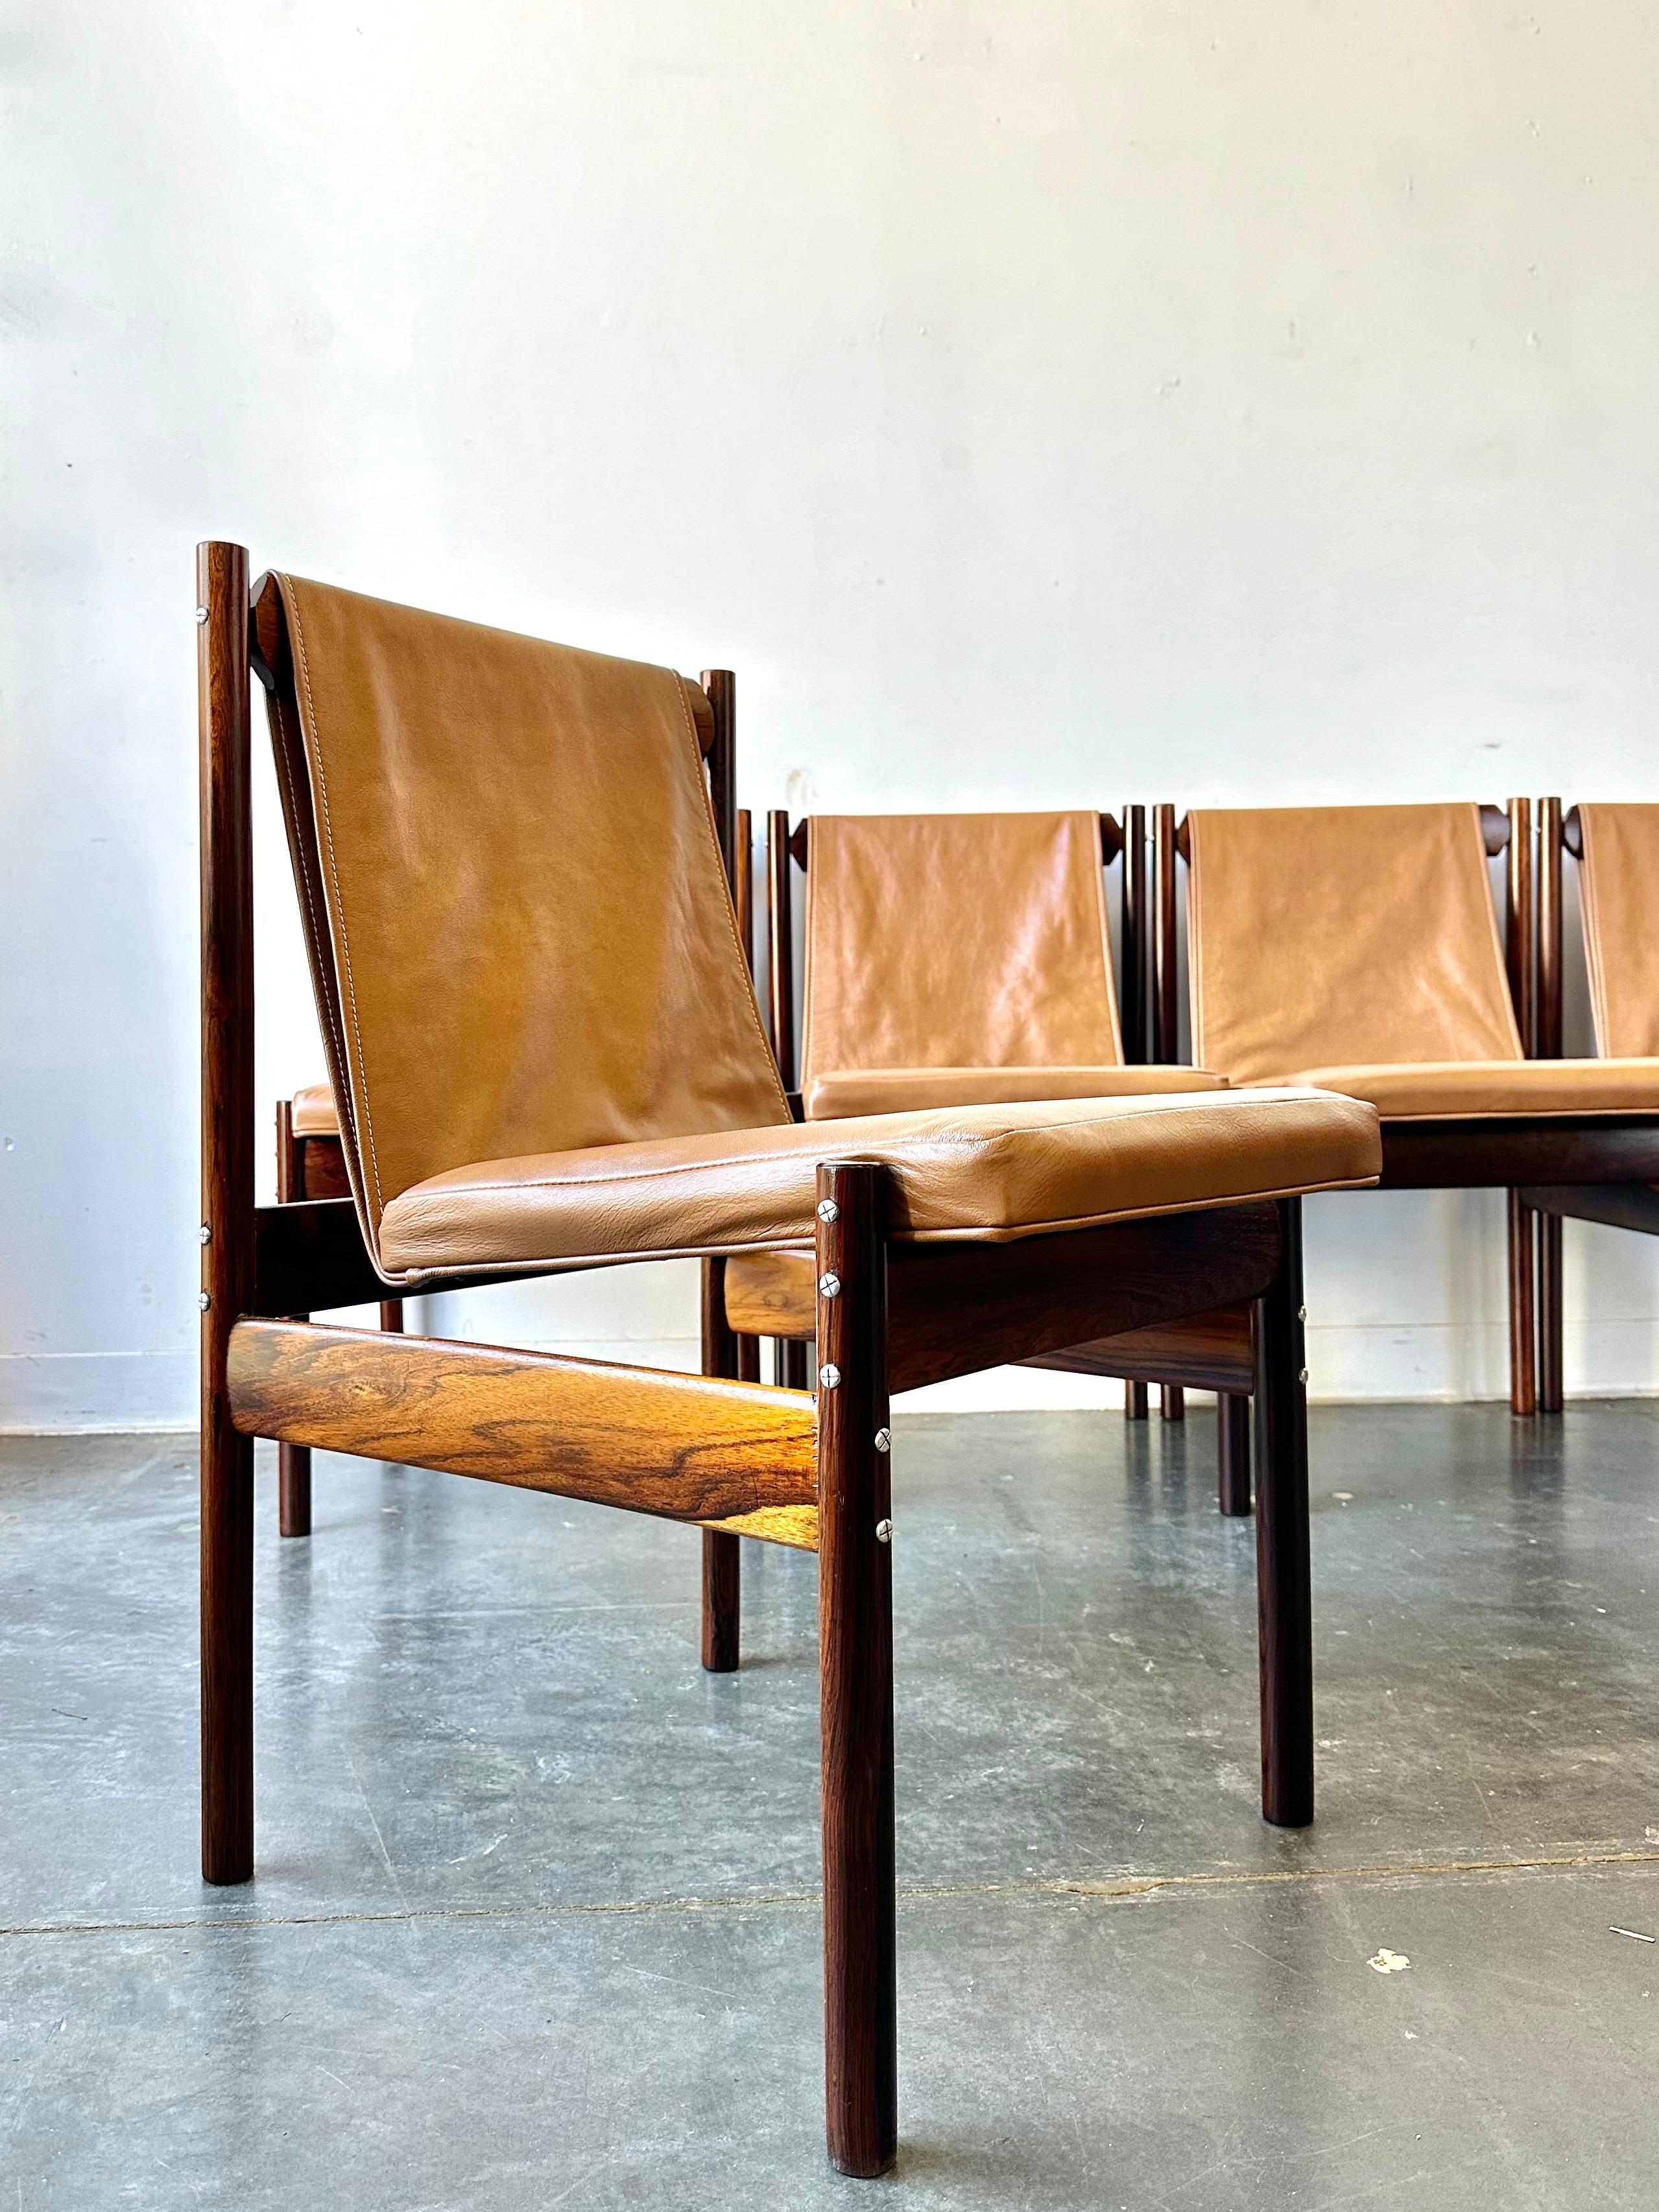 Brazilian rosewood and leather sling dining chairs designed for novo rumo after Jorge Zalsupin circa 1960.

These phenomenal chairs have been professionally restored from frames to brand new Moore and Giles leather.

These are ready to be enjoyed